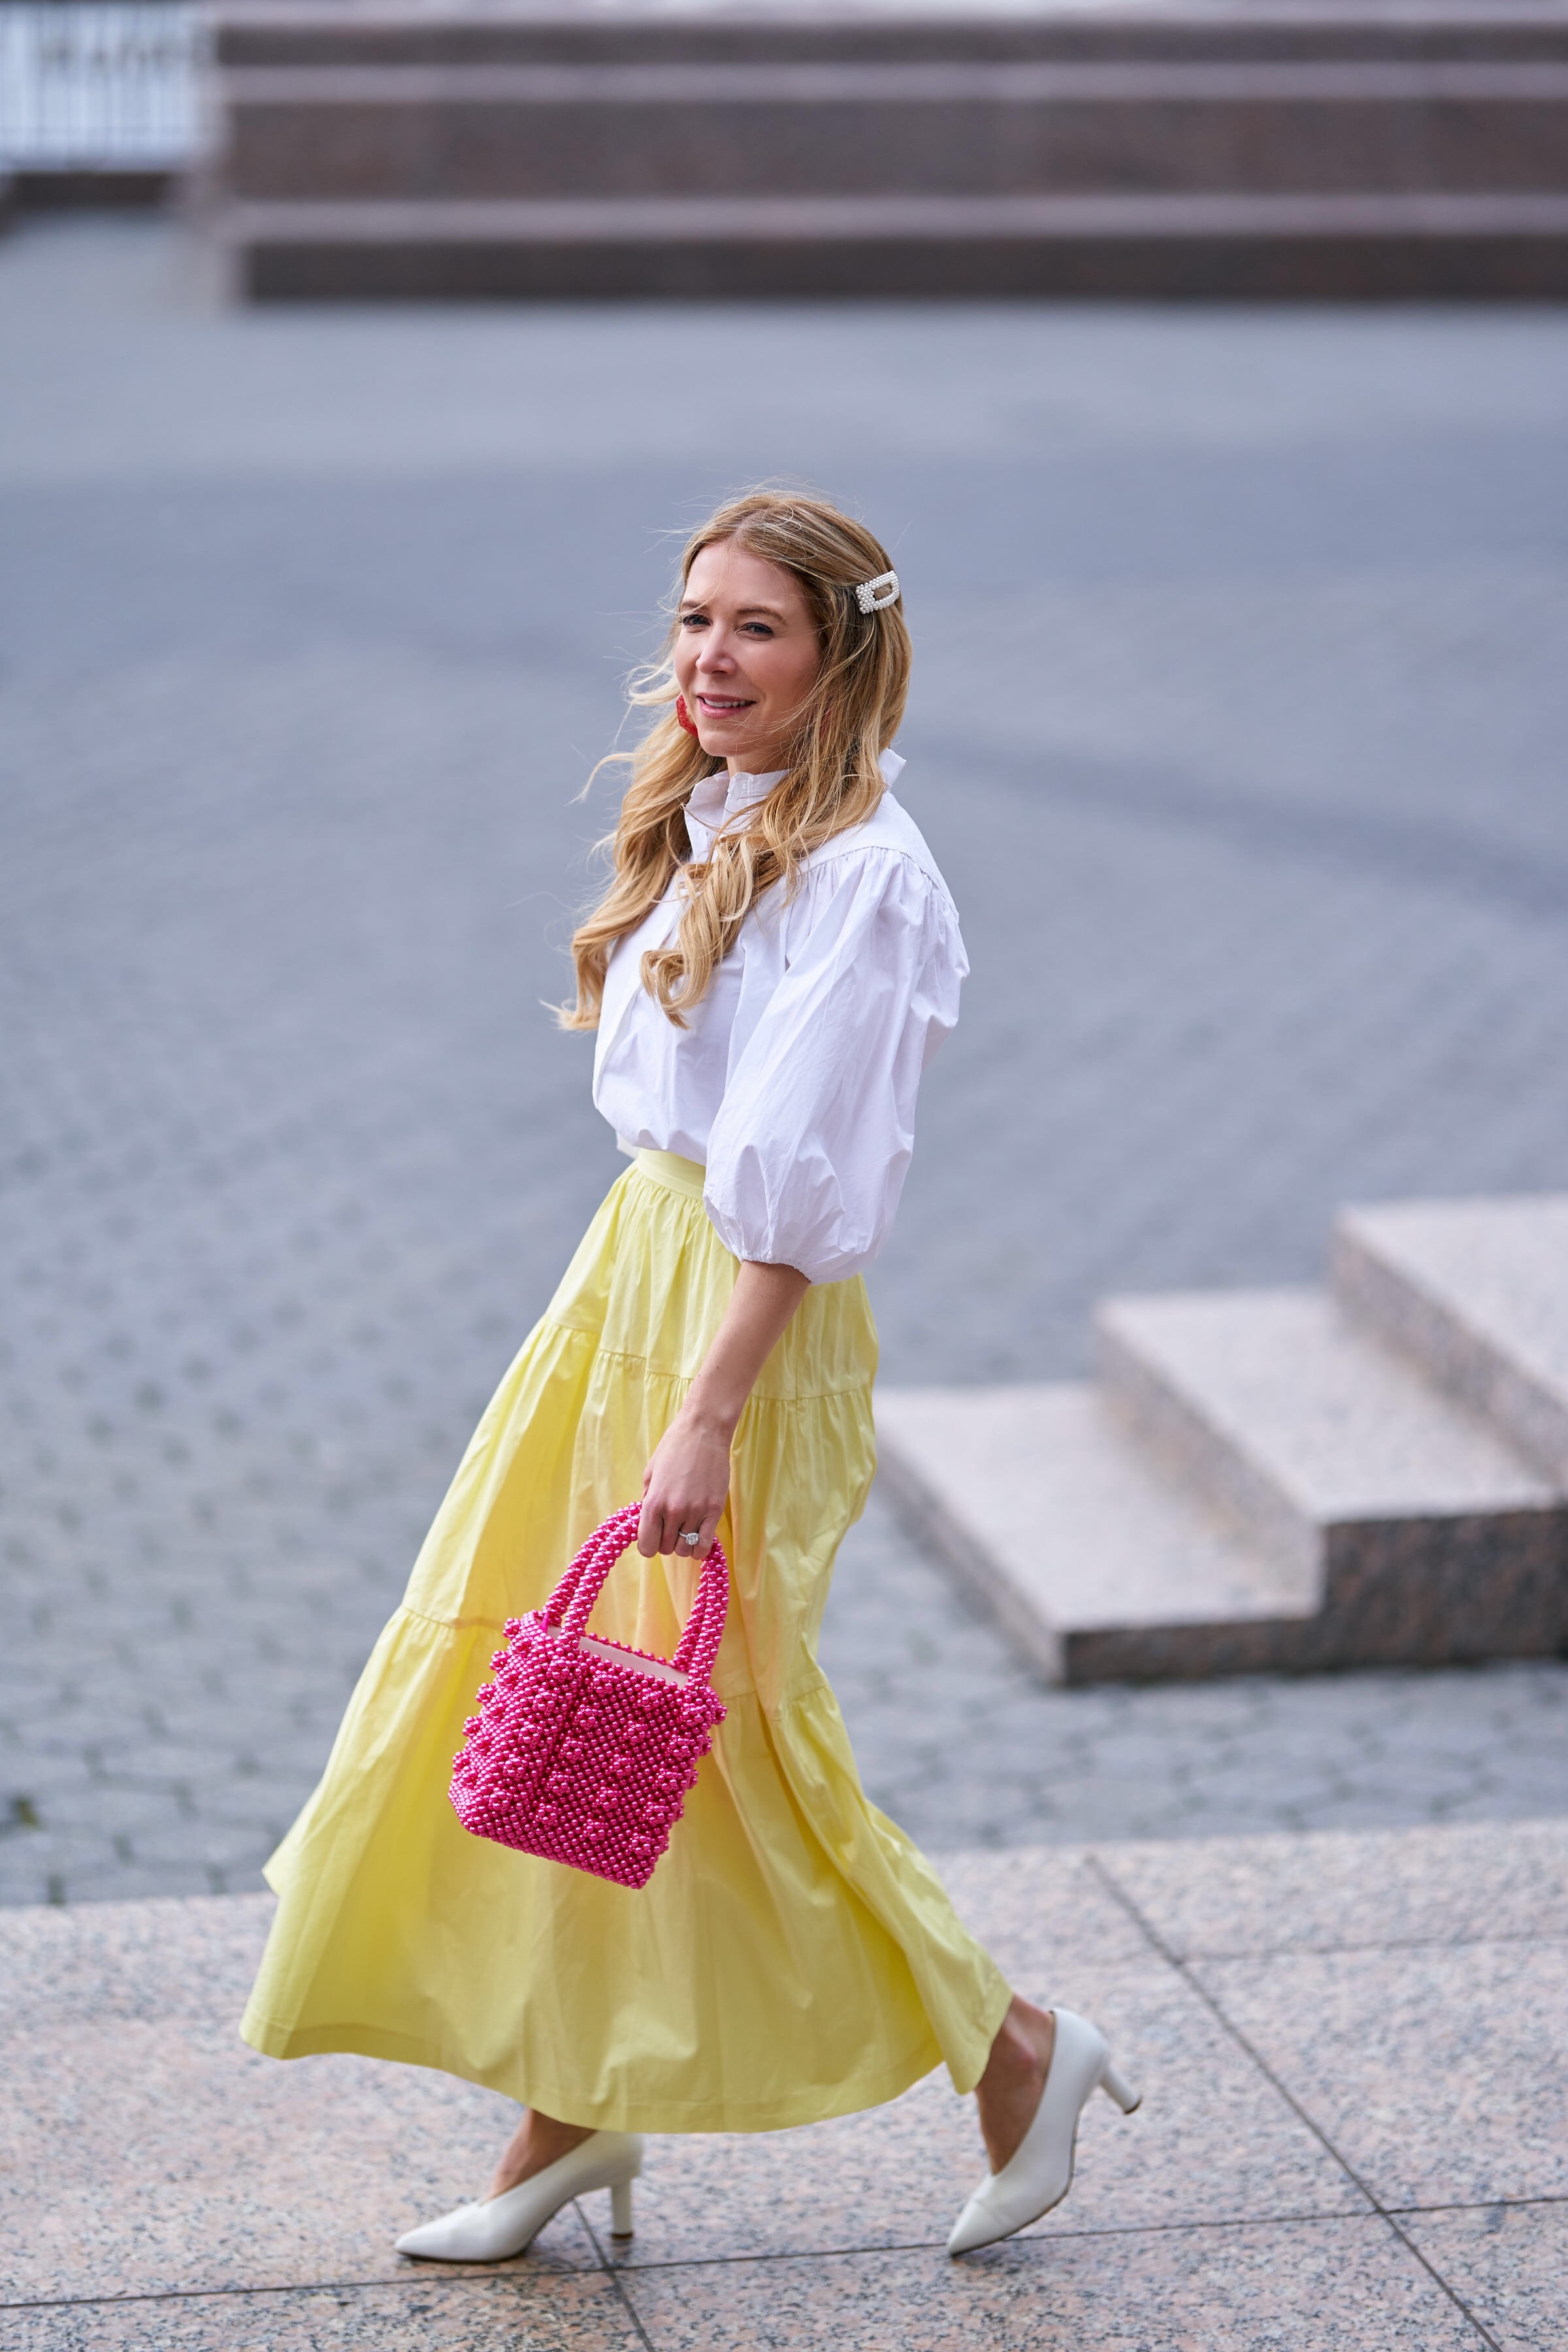 Staud yellow skirt, Shrimps bag, Barrettes hair accessories, www.abouttheoutfits.com